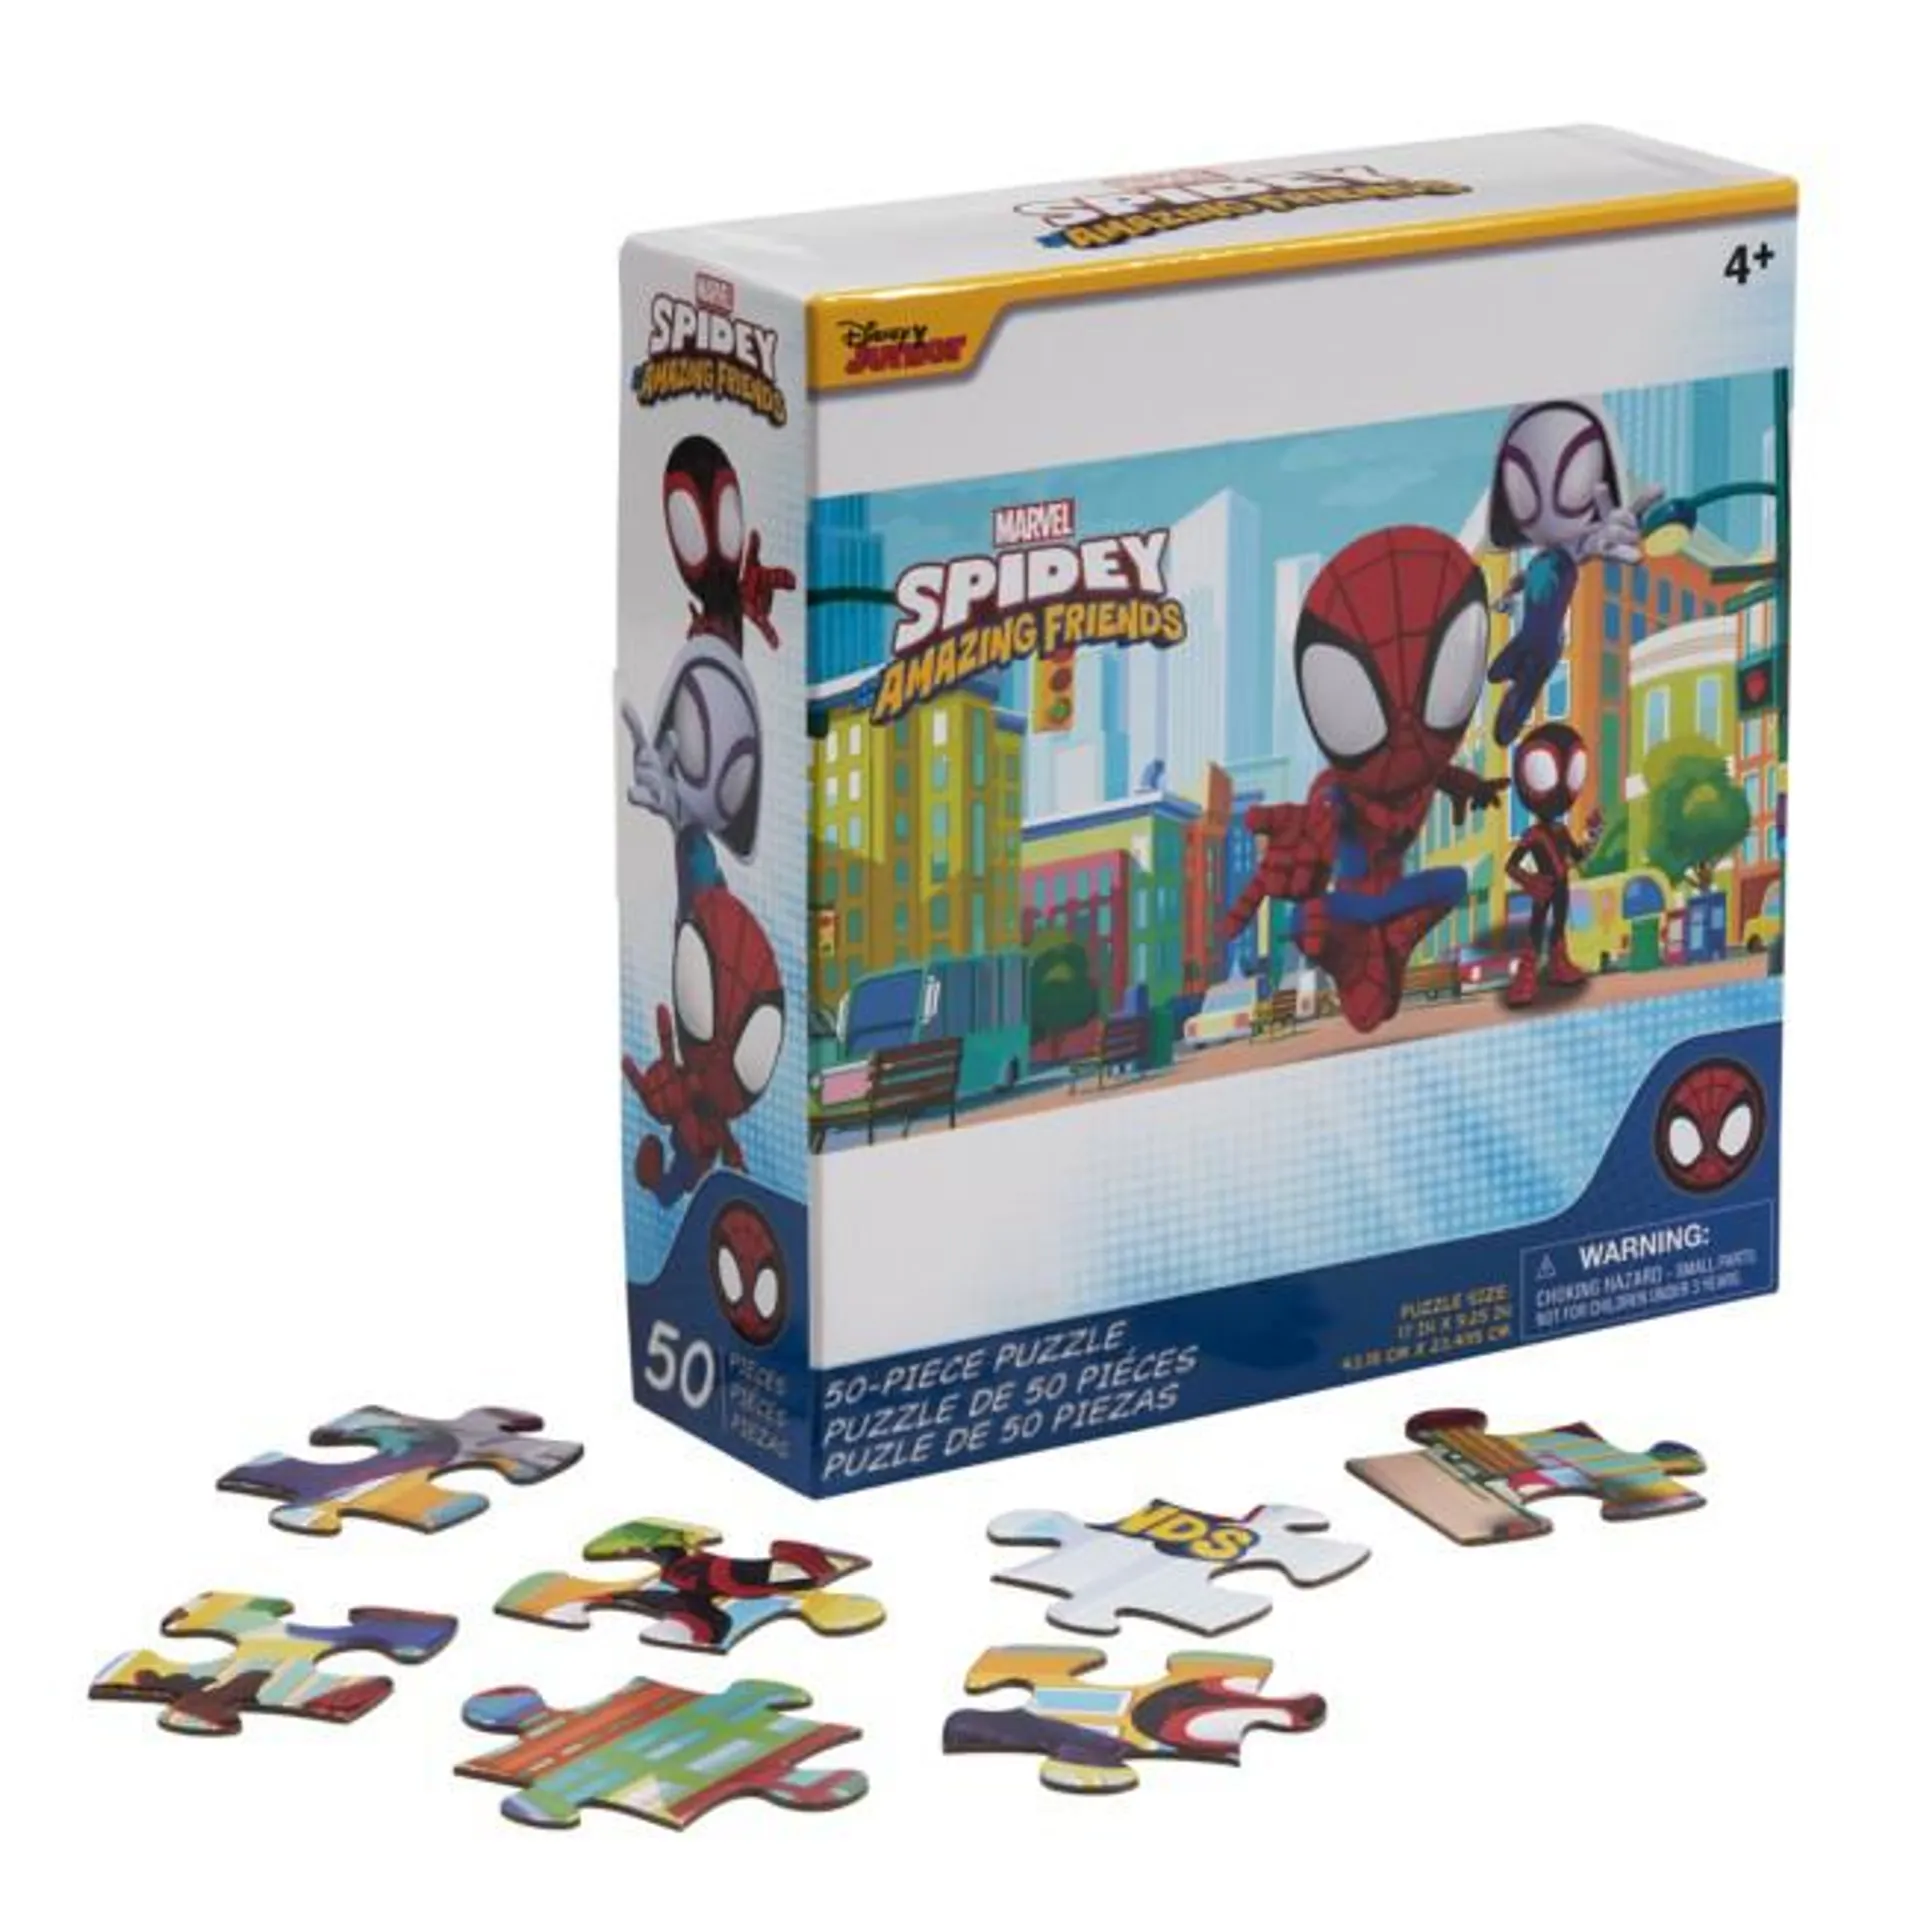 Disney Store Spidey and His Amazing Friends 50 Piece Puzzle